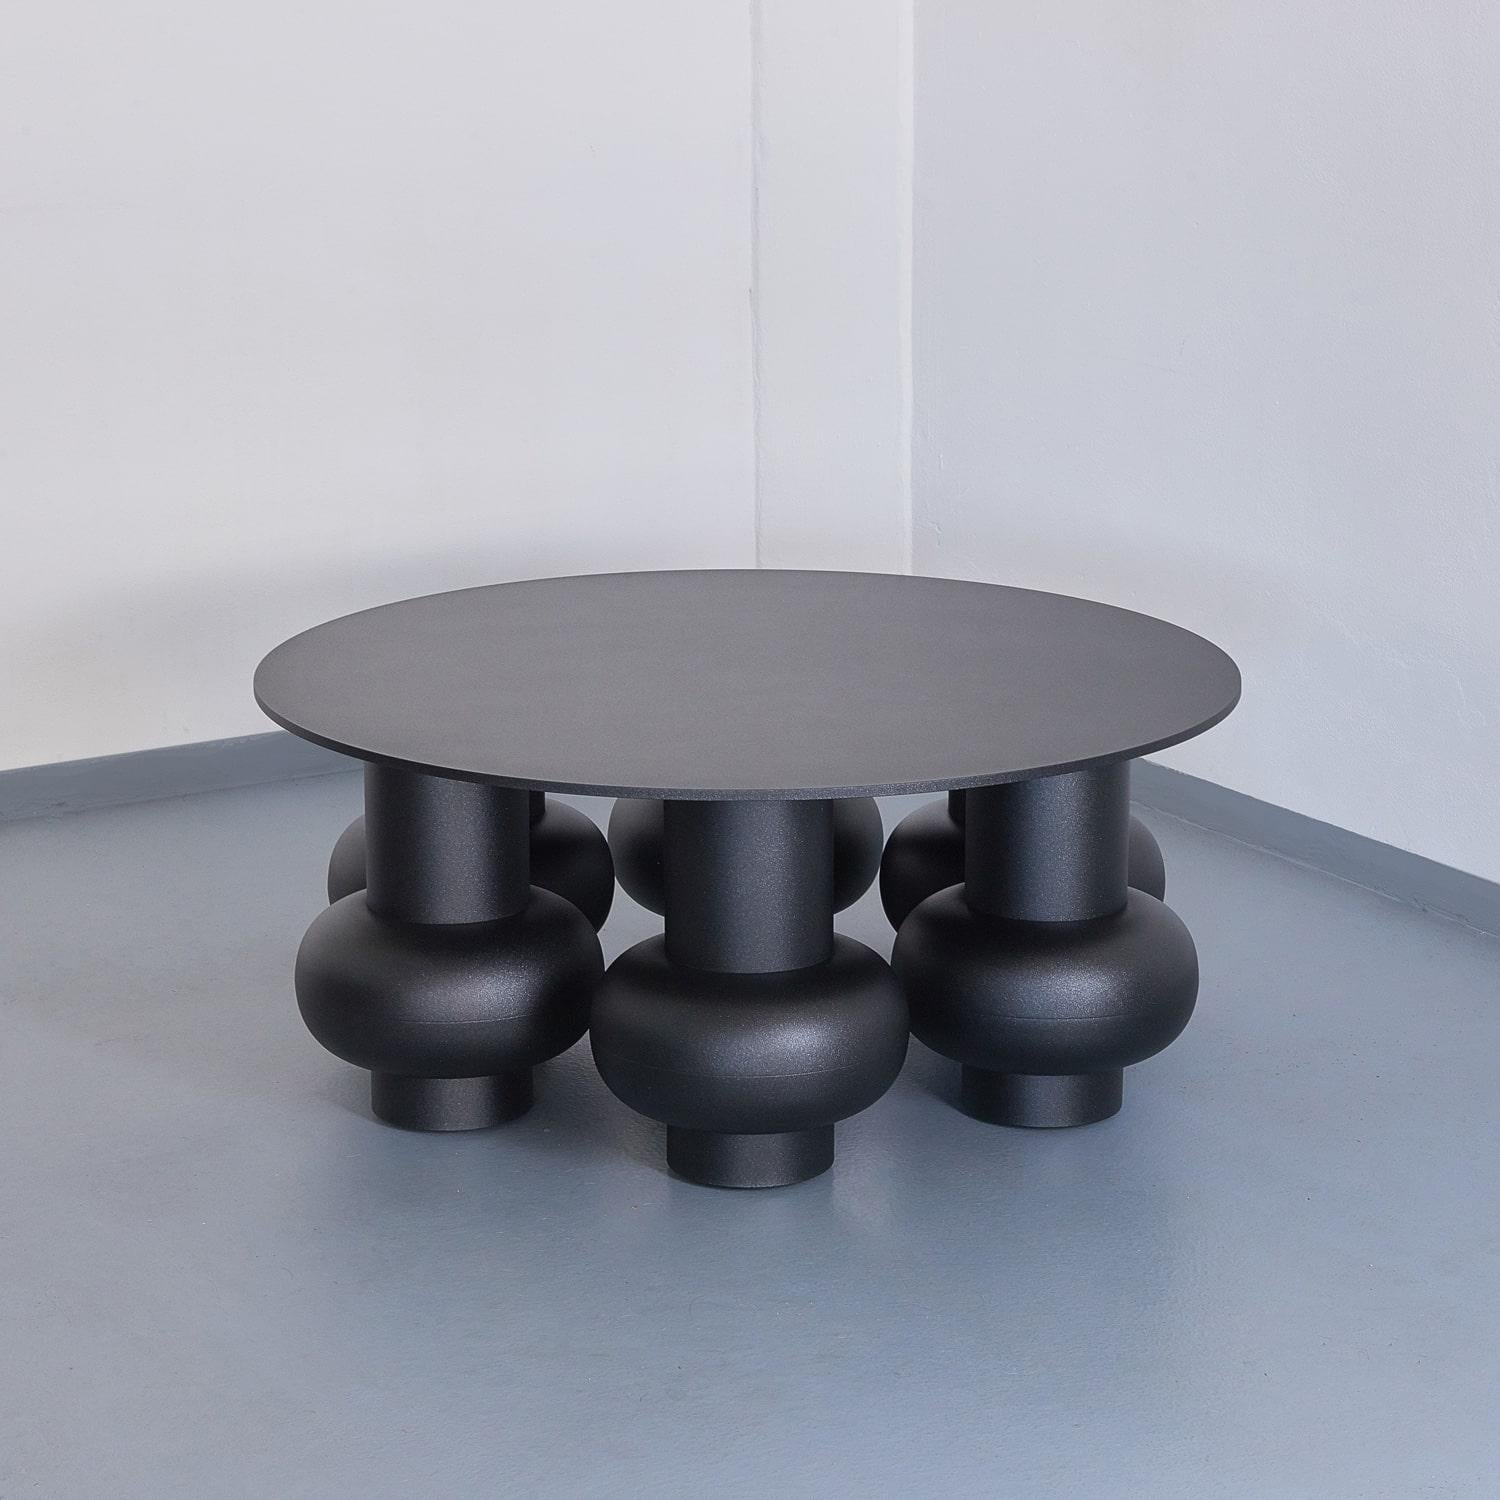 The Odyssey table is dedicated to Slovenian architect Josip Plecnik and is freely inspired by the aesthetics of his sculptural work. The designer describes Plecnik as “the archetype of a timeless personality, an artist and a visionary who, in his